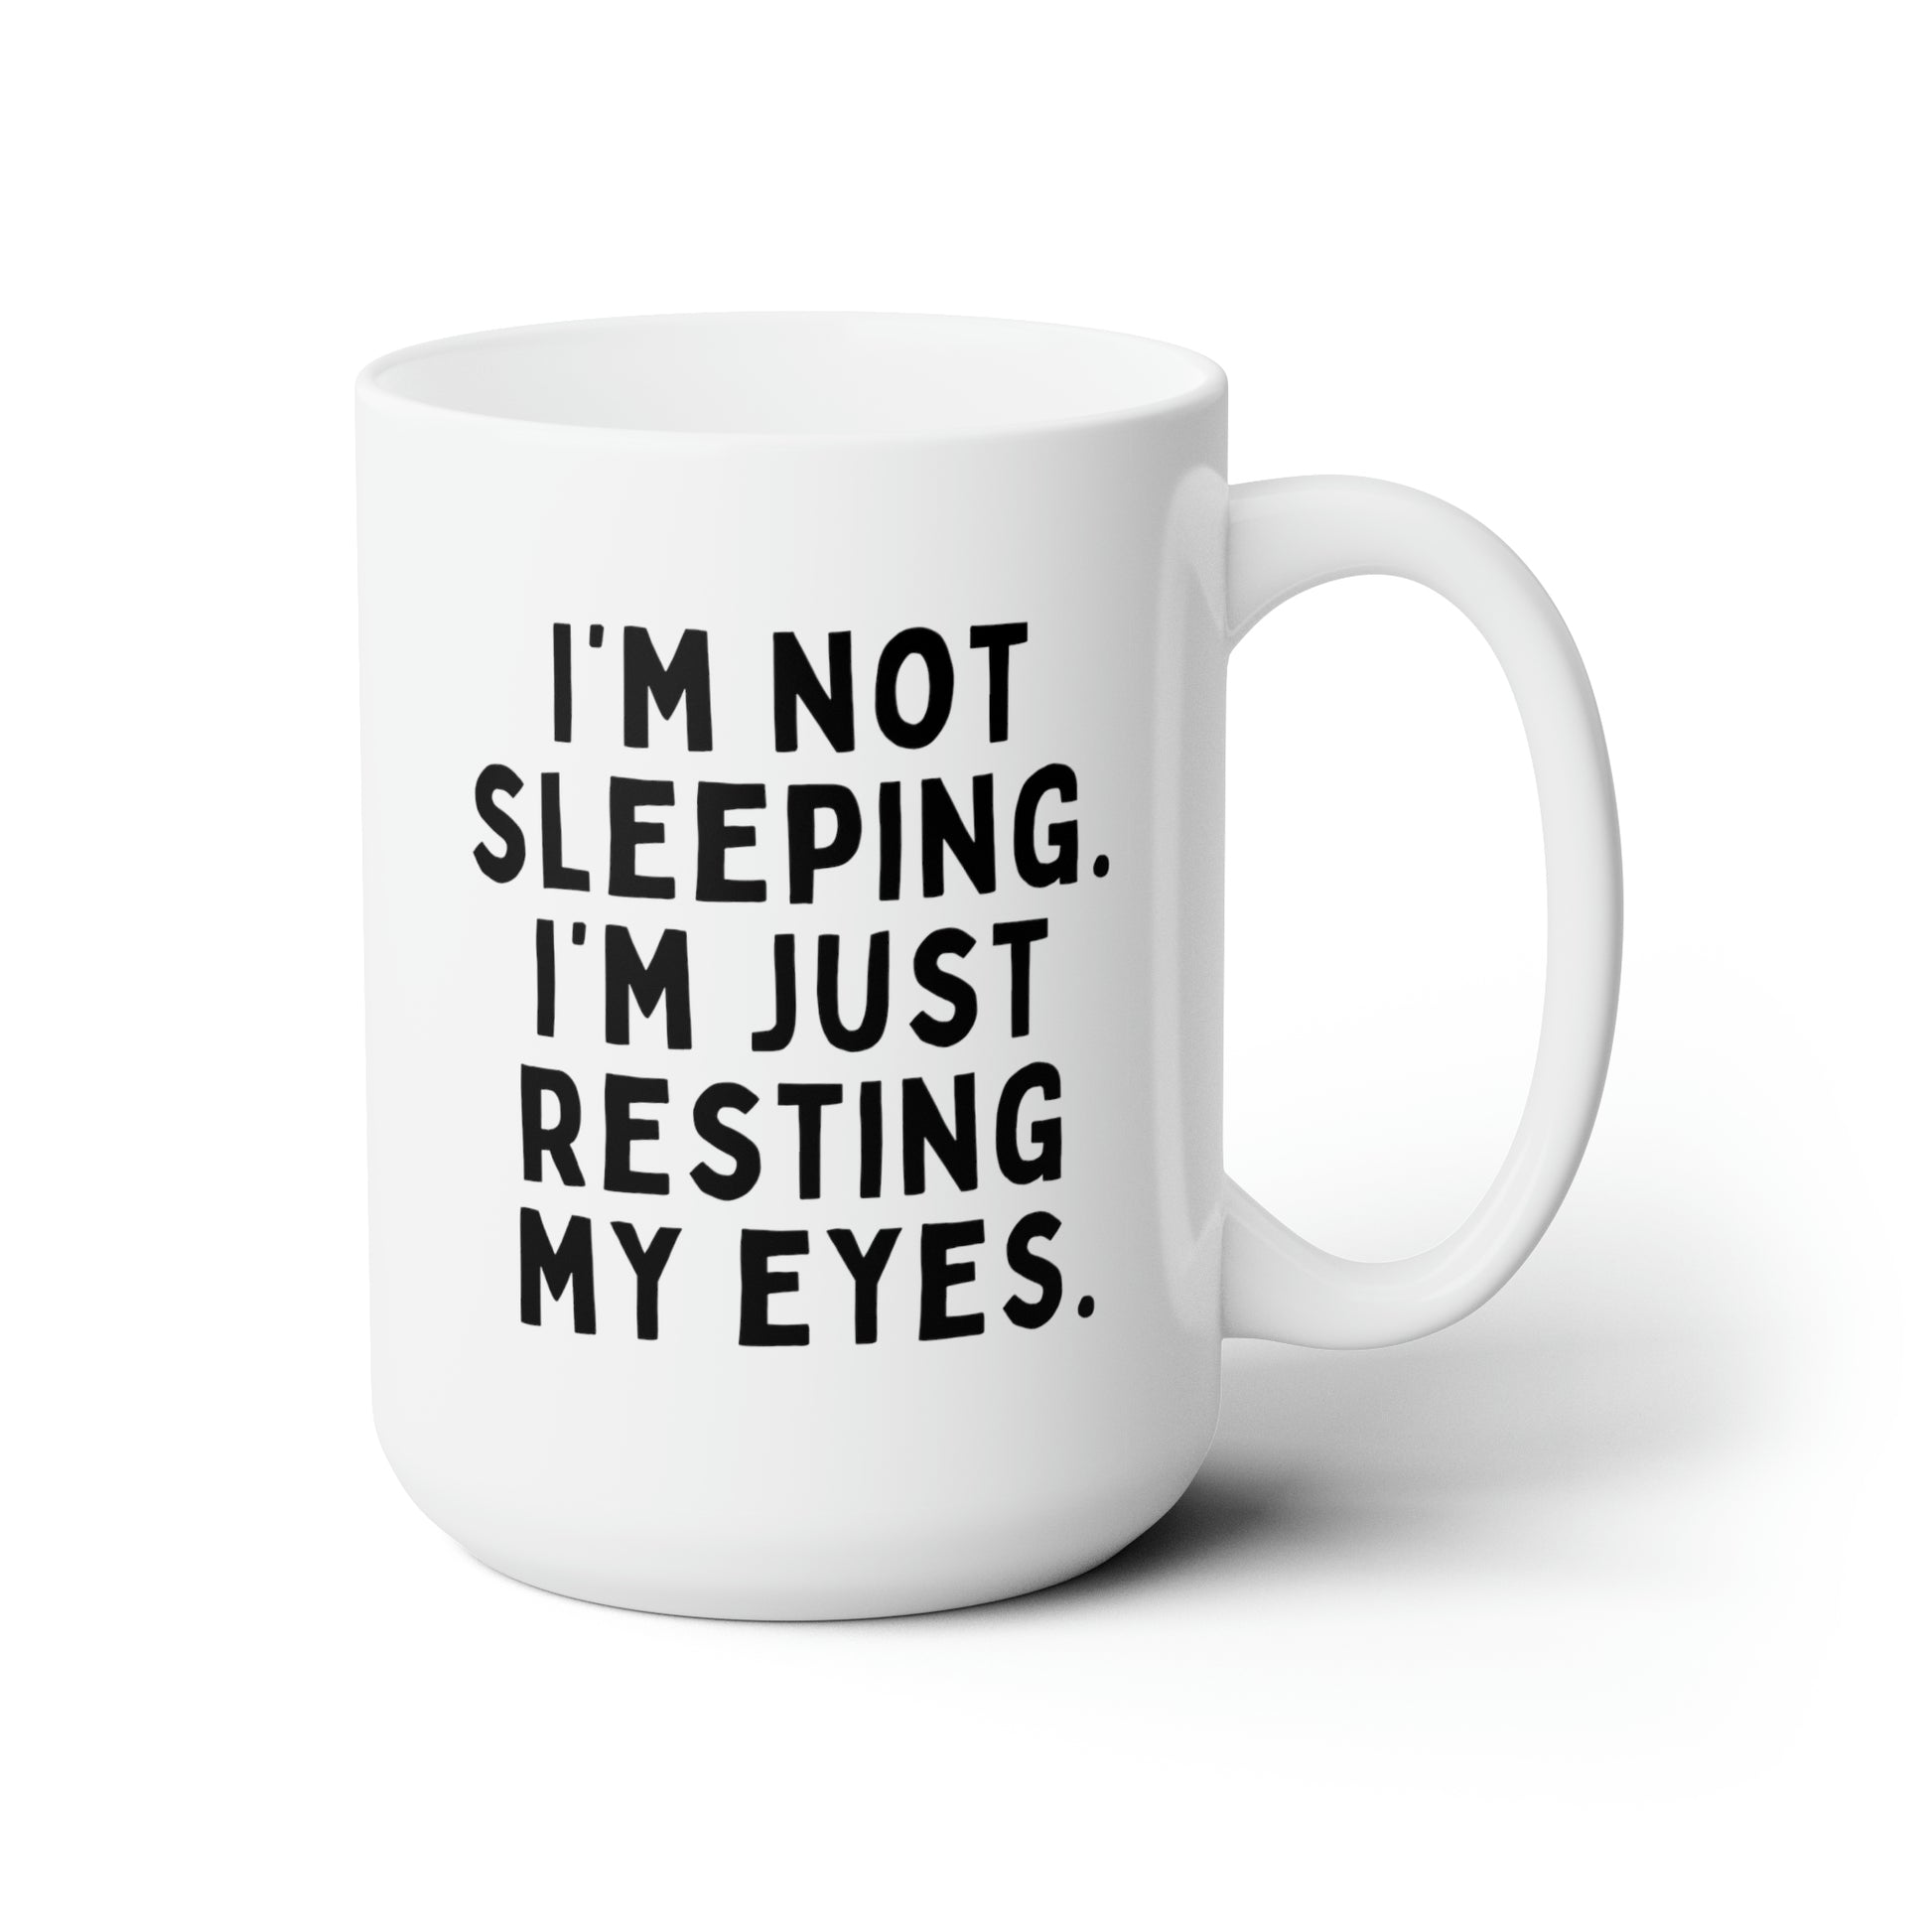 I'm Not Sleeping. I'm Just Resting My Eyes. 15oz white funny large coffee mug gift for dad fathers day daddy husband grandpa cup him waveywares wavey wares wavywares wavy wares